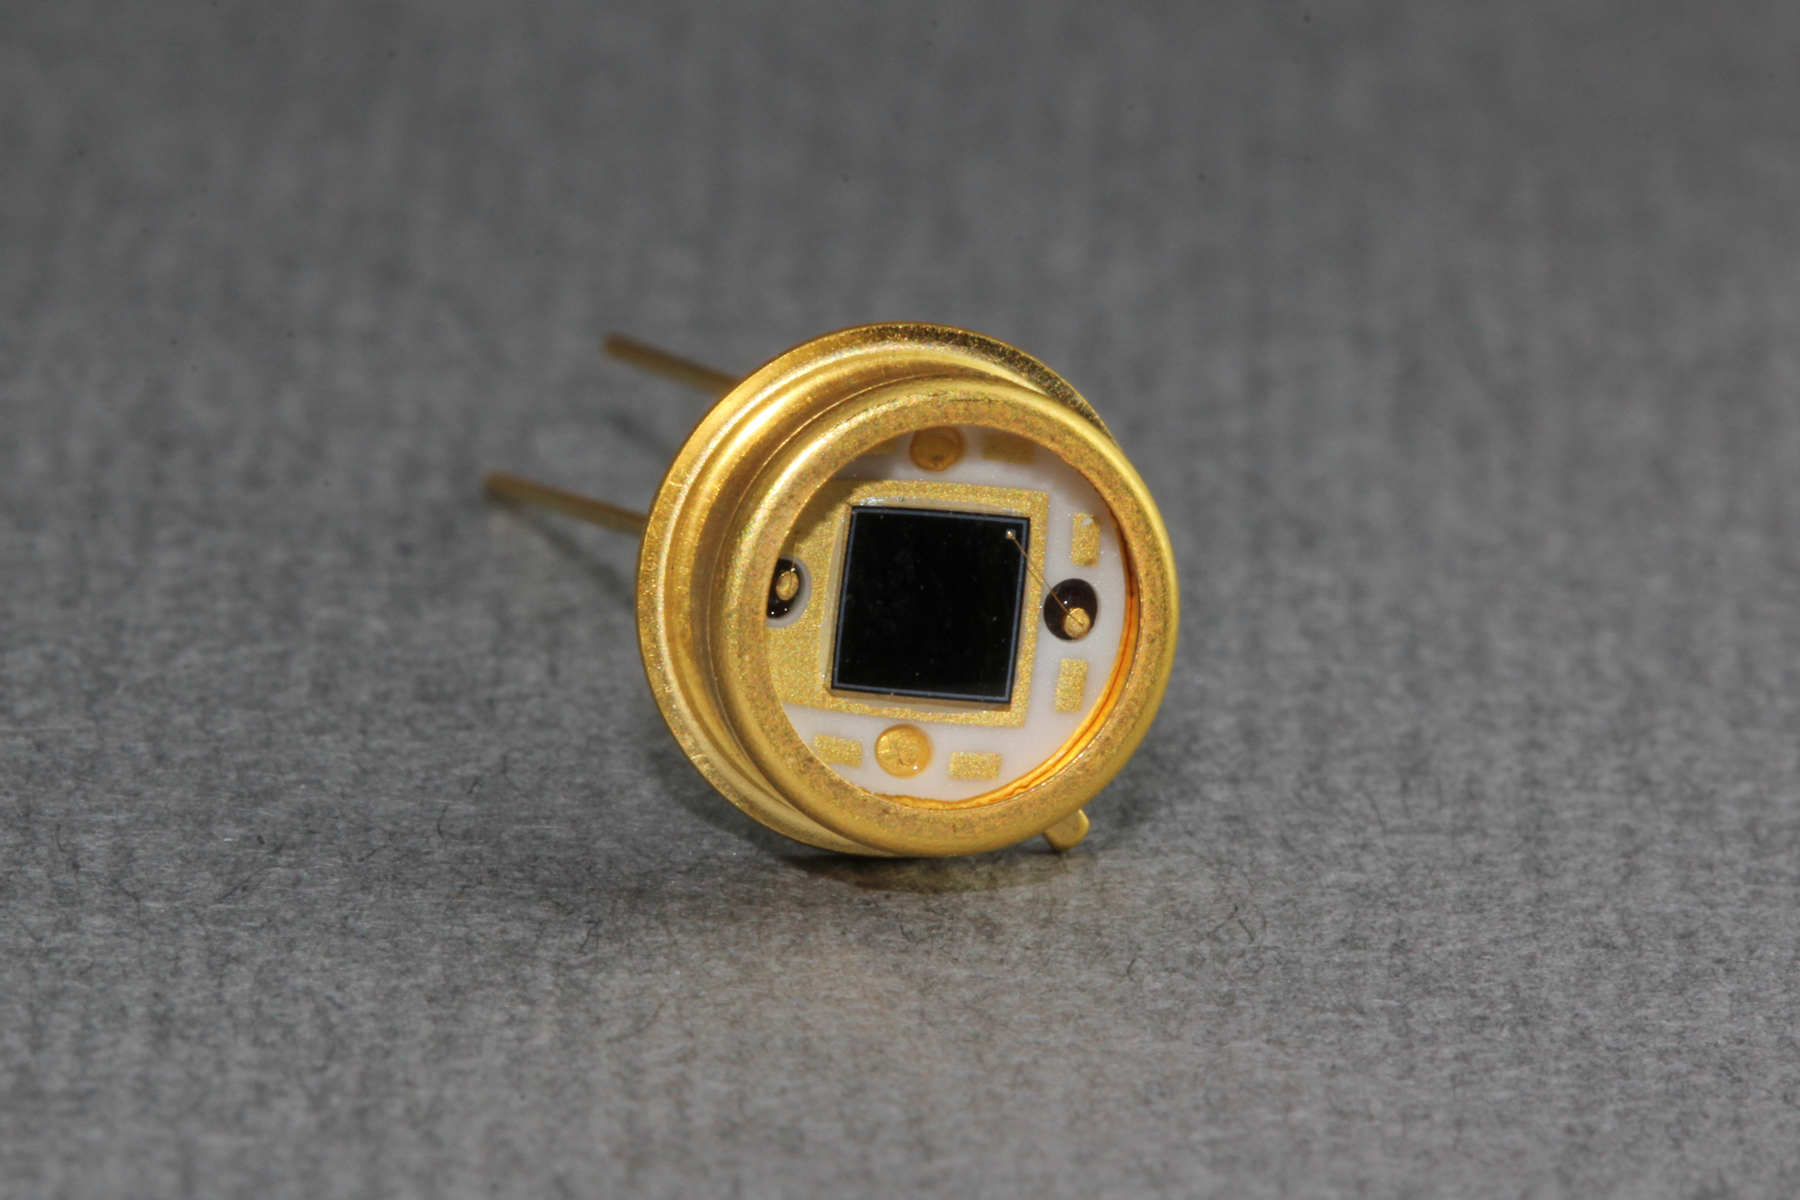 Silicon Photodiode Offerings Include New Processes